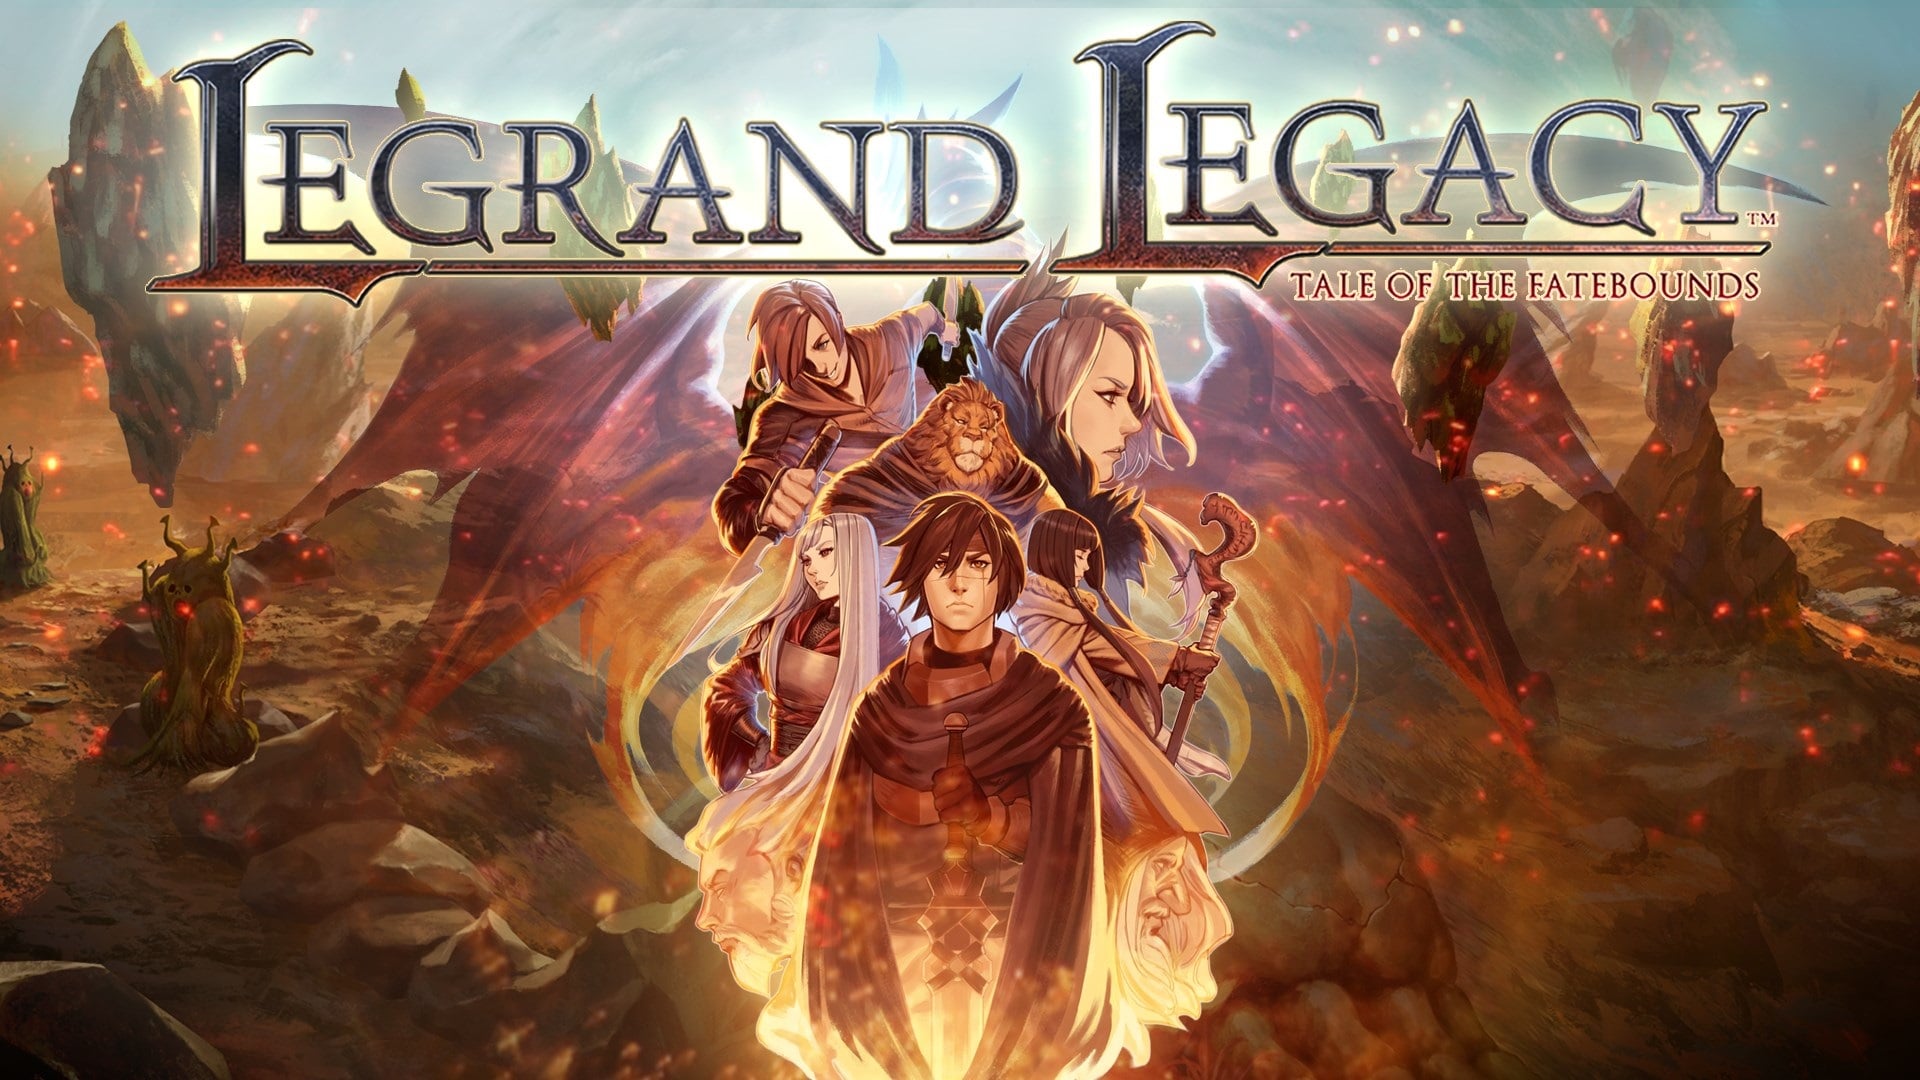 Video Game LEGRAND LEGACY Tale Of The Fatebounds 1920x1080